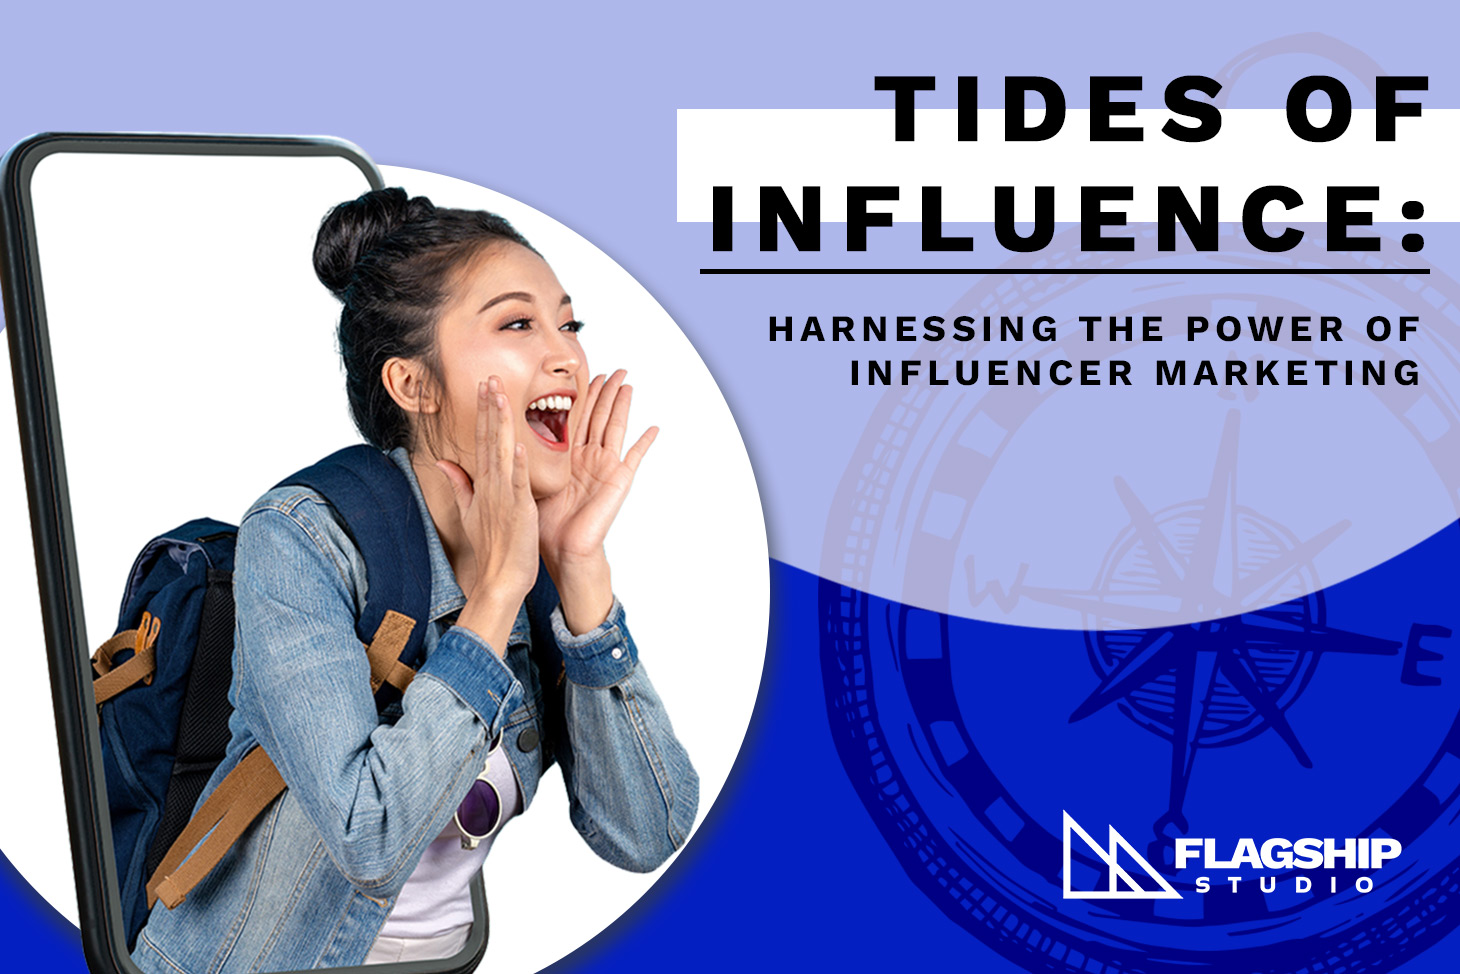 Tides of Influence: Harnessing the Power of Influencer Marketing